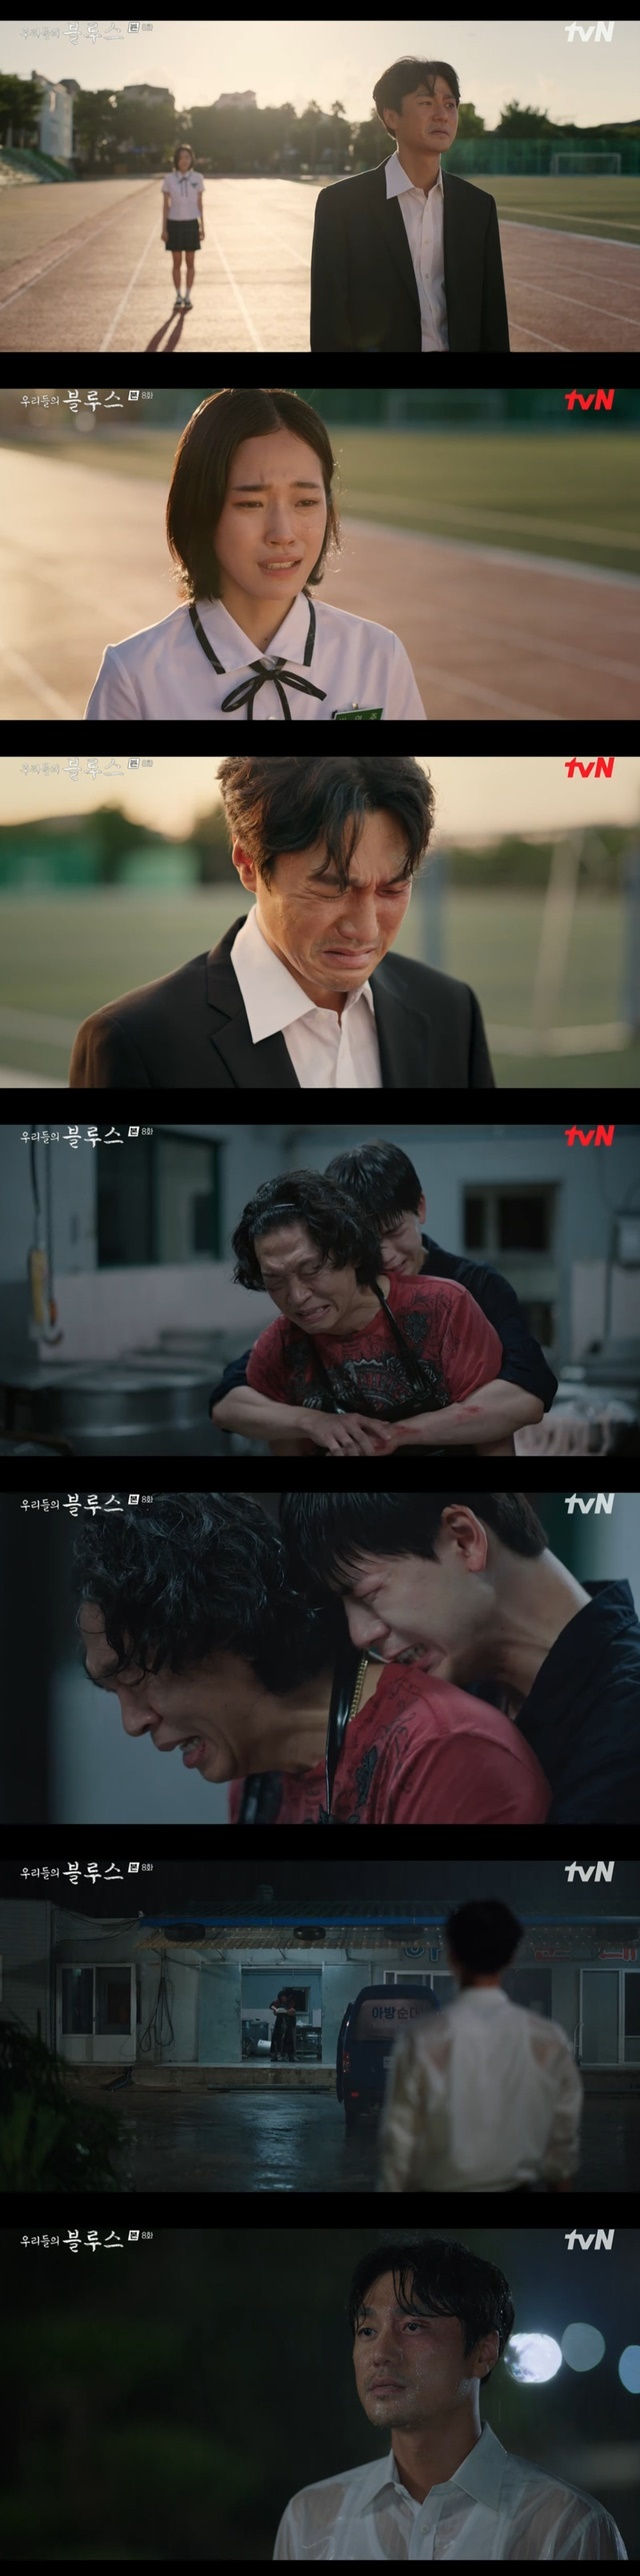 Children who decided to give birth hard also felt tears and sympathy.In the 8th episode of TVNs Saturday Drama Our Blues (playplayplay by Noh Hee-kyung/director Kim Gyu-tae), which was broadcast on May 1, Bang Ho-sik (played by Choi Young-joon) turned his back on his daughter, airing stock (played by Noh Yoon-seo), and poured tears.The 18-year-old first-class airing stock and the second-class Chung Hyeon (Bae Hyun-sung) of the school were late to know six months of pregnancy and decided to give birth, turning them upside down to both families and schools.The protection ceremony, which raised a doting daughter alone, failed to accept the pregnancy decision of an airing stock and encouraged her to choose whether she was herself or a child.Choi Jung-in was angry by beating his son Chung Hyeon and Chung Hyeon struggled to go to school and work part-time.Choi Jung-in was struck by his son Chung Hyon as he was going to hospital with his airing stock wrist after thinking.Chung Hyon hit his father, Choi Jung-in, and said, Are you ashamed of me? Im ashamed of Father for life. Ill go with you when Mom leaves.I didnt go because I felt sorry for Father. I dont have Fathers son anymore. I cant do it anymore!The two were taken to the police station as a protection ceremony was punched again by Choi Jung-in.The police station said that Choi Jung-in had been told that his wife had run away and borrowed rice for him, saying, I am an angler with my daughter.You want to die, and thats when my heart is in it, he said, referring to the reason for his turn to Ansuk.However, after Choi Jung-in collapsed due to acute diabetes, the protection ceremony was carried to the hospital with Choi Jung-in.The guard ceremony then gave up taking her daughter, airing stock, to the hospital and went to school. The homeroom teacher said, In school, the lord and the prefecture will accept it in accordance with the student human rights ordinance.Even if you are pregnant, you can go to school, so please accept your father as a lord. The guard went out of school without looking at his daughters airing stock with his head down, and when the airing stock came out, he said, I will get you a flesh.You can do it with the strings or with the kids.The airing stock said, Why do not you understand Father when you and Friends understand me? Why?You like it when youre on your side, both your friends and your currents, and your children, and not everything in your life is yours, he said.Im not going to say I did anything wrong if I died. I cant say my Christina Aguilera died a mistake. Im so sorry, Father.Im so sorry that Father is all I have in this world and Im lonely. But Father, Im so lonely.I have Hyun and Christina Aguilera, but I am so lonely because I do not have Father. I turned my back to tears, but I did not look back or soothe my daughter again.Chung Hyon was worried about his father Choi Jung-in when he heard that he was suffering from acute diabetes. Choi Jung-in said, I am proud of you more than anyone else in the world, saying, I am going to be embarrassed by you,But is this father ashamed? Is this not his son? Lets not see him for the rest of his life. Chung Hyon embraced his father, Choi Jung-in, and he cried I did not do it Father and Choi Jung-in tears together.The protection ceremony visited the Choi Jung-in area and witnessed it from a distance.